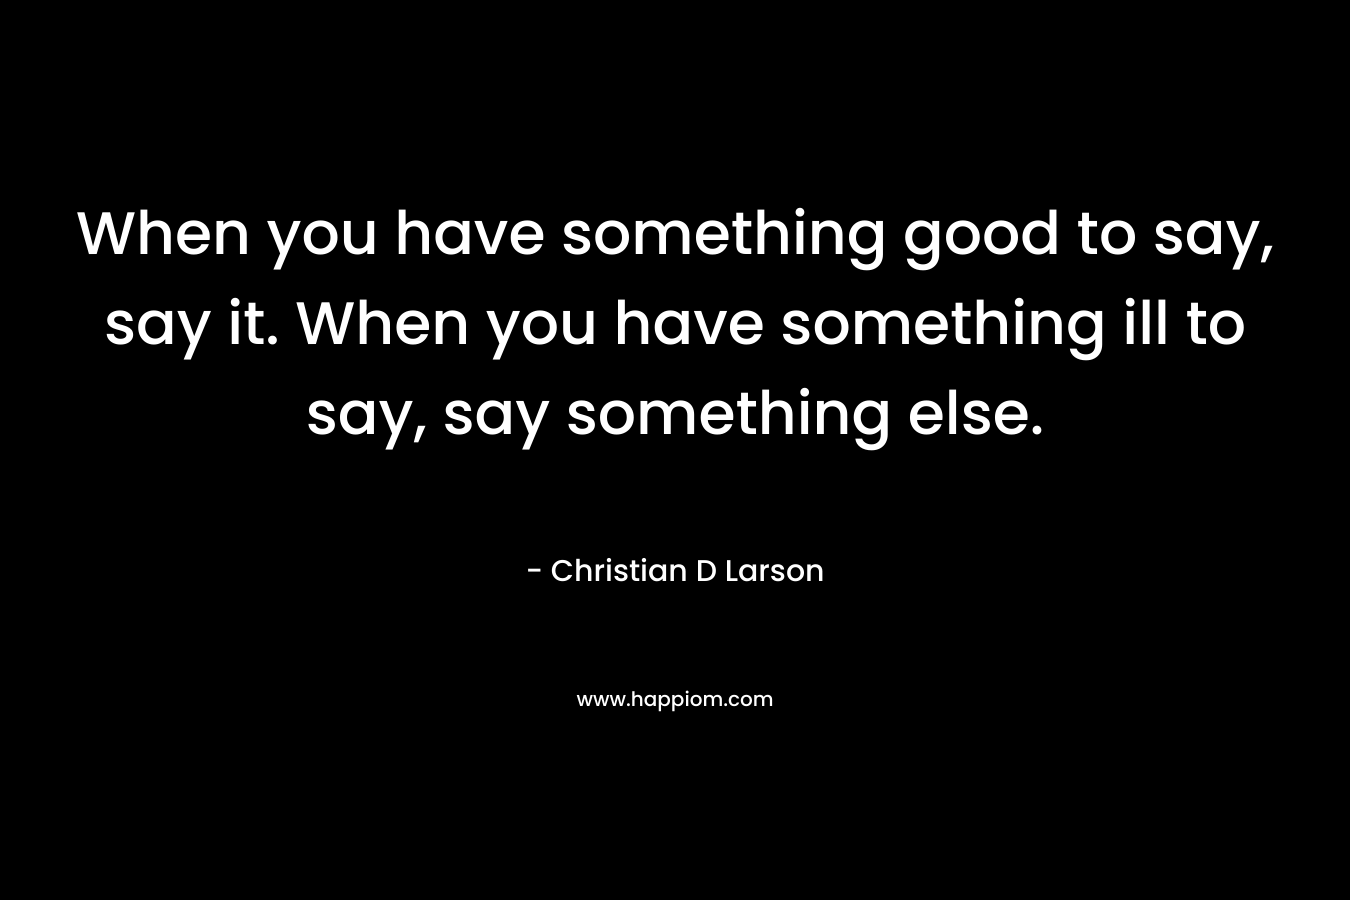 When you have something good to say, say it. When you have something ill to say, say something else.